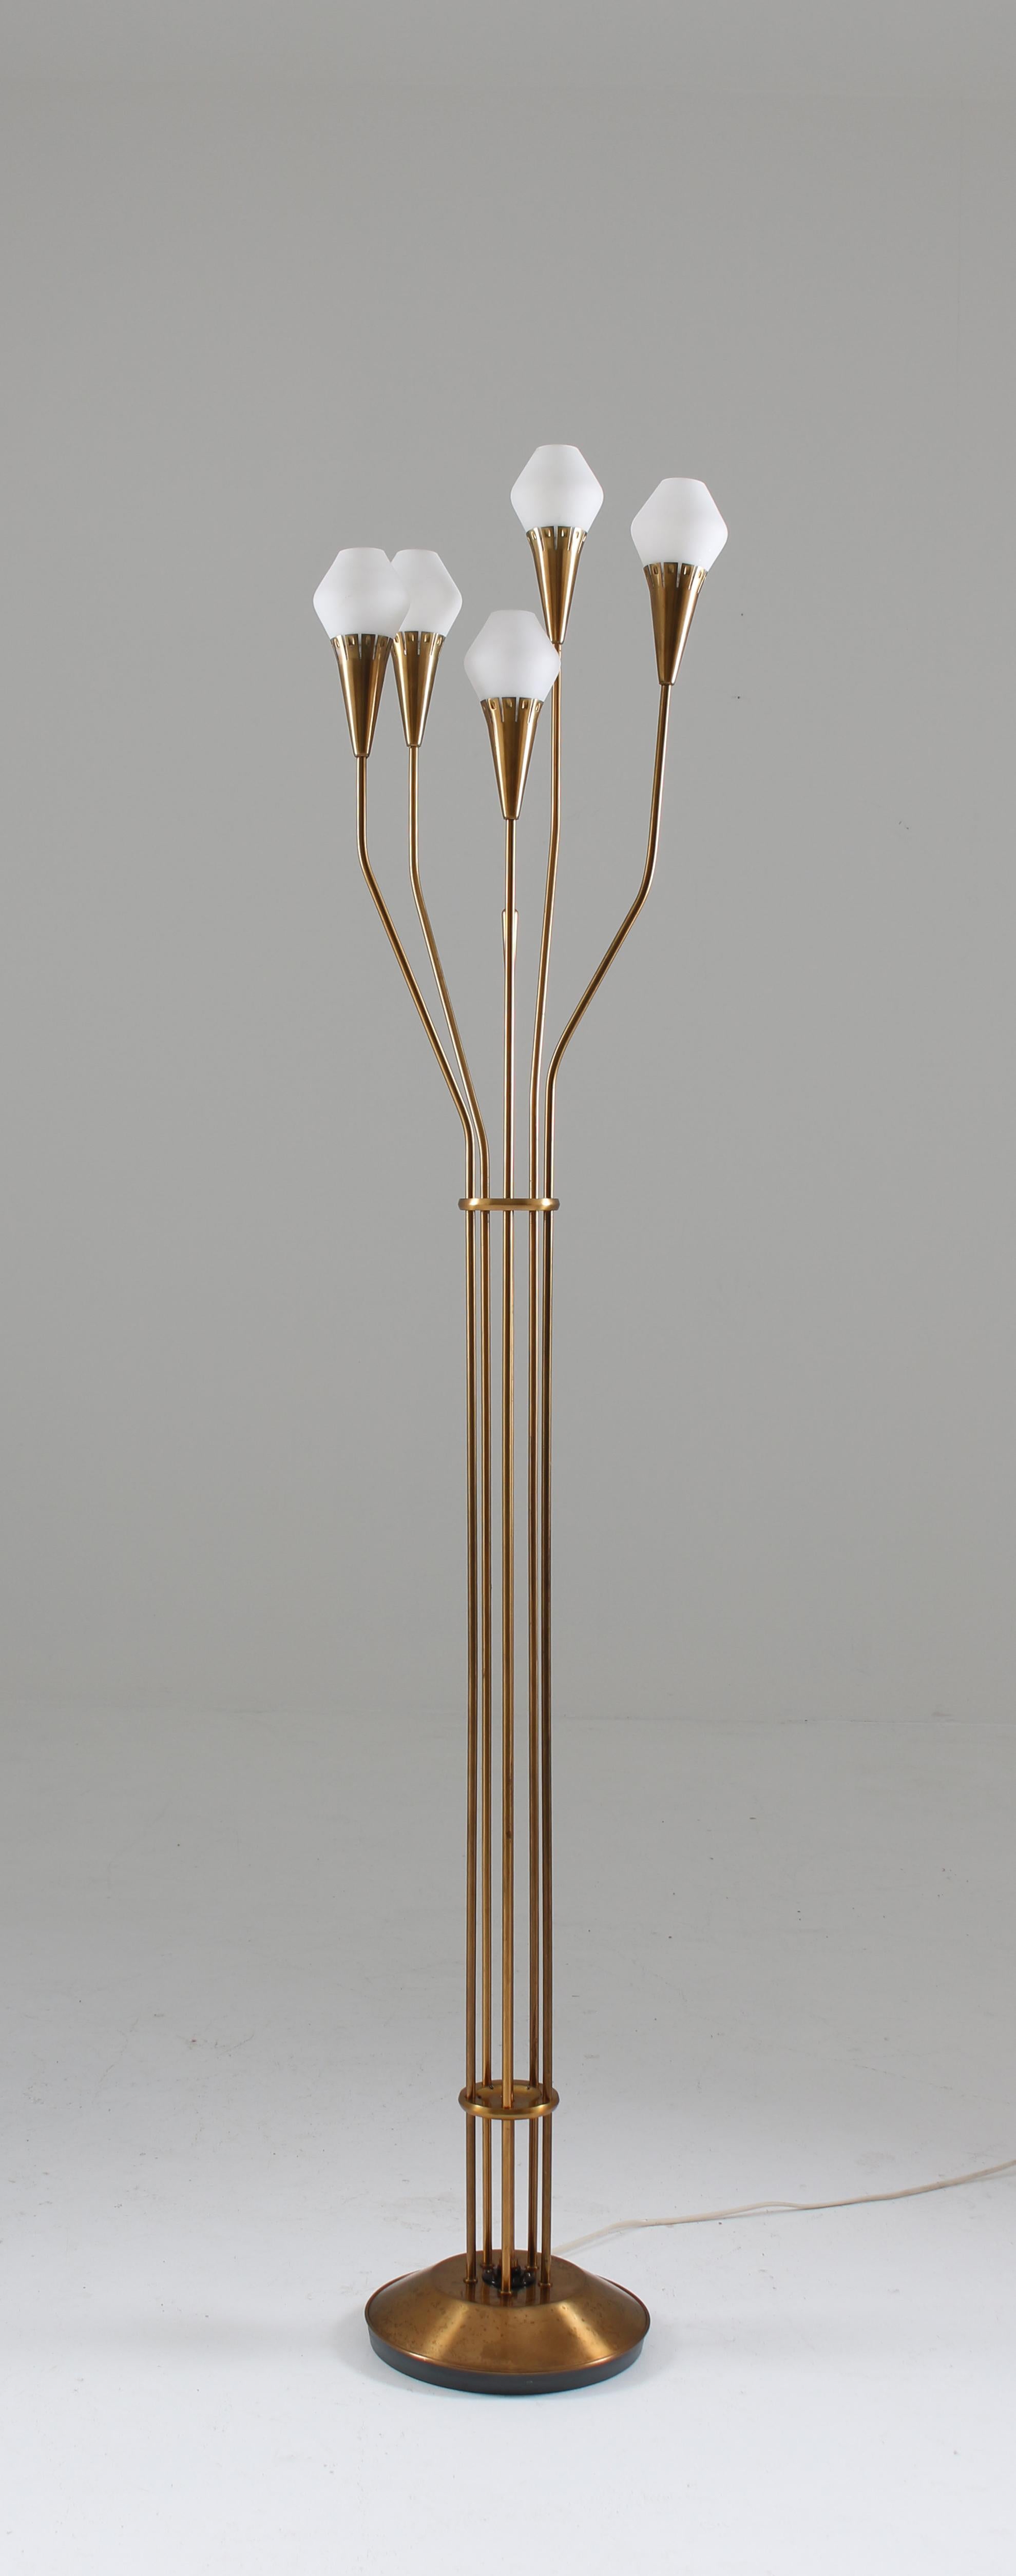 Extremely rare floor lamp in brass and opaline glass by Böhlmarks, Sweden. 
This top-quality floor lamp consists of five light sources, each on a separate brass pole, holding a shade in opaline glass. The light switch is the brass rod in the